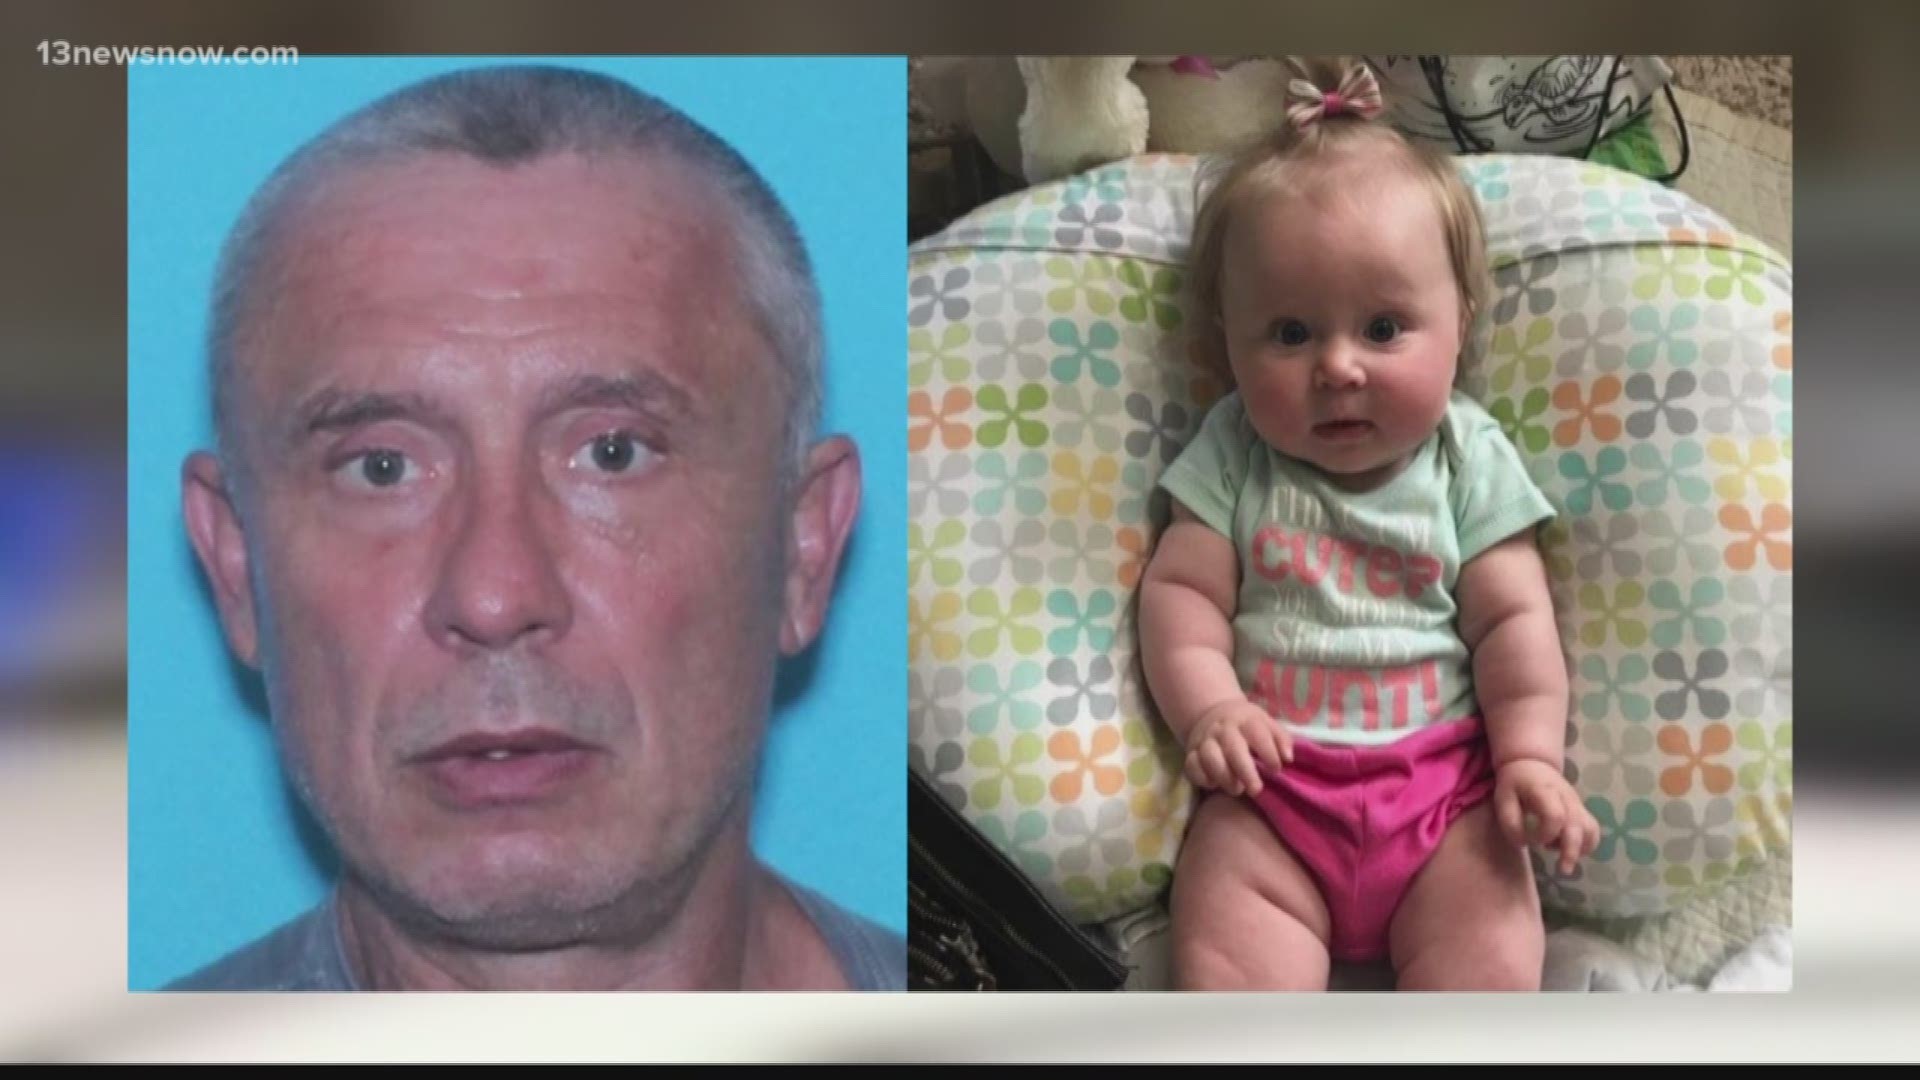 According to police, there was a possible sighting in the area of Seven Spring, NC around 6:45 p.m. Carl Ray Kennedy and his daughter Emma Grace Kennedy may possibly be headed to Oak Island, NC.